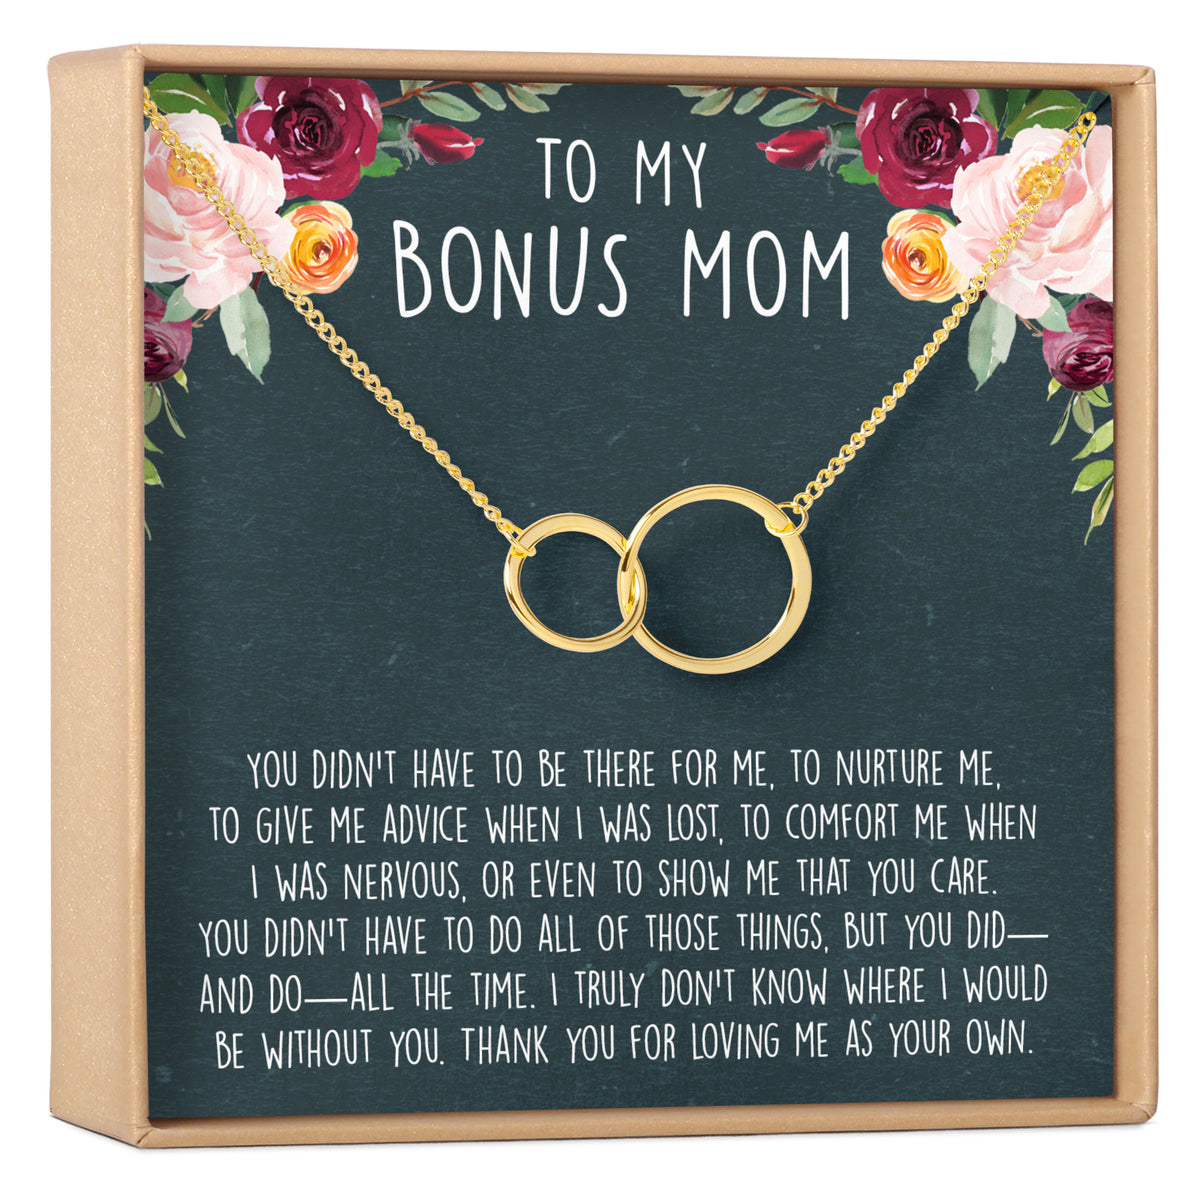 Gifts for Mom from Daughter, Son, Grandma, Mother in Law, Step Mom, Bonus Mom, Birthday, Christmas, Mothers Day Gifts, Mom to Be, New Mom Gifts